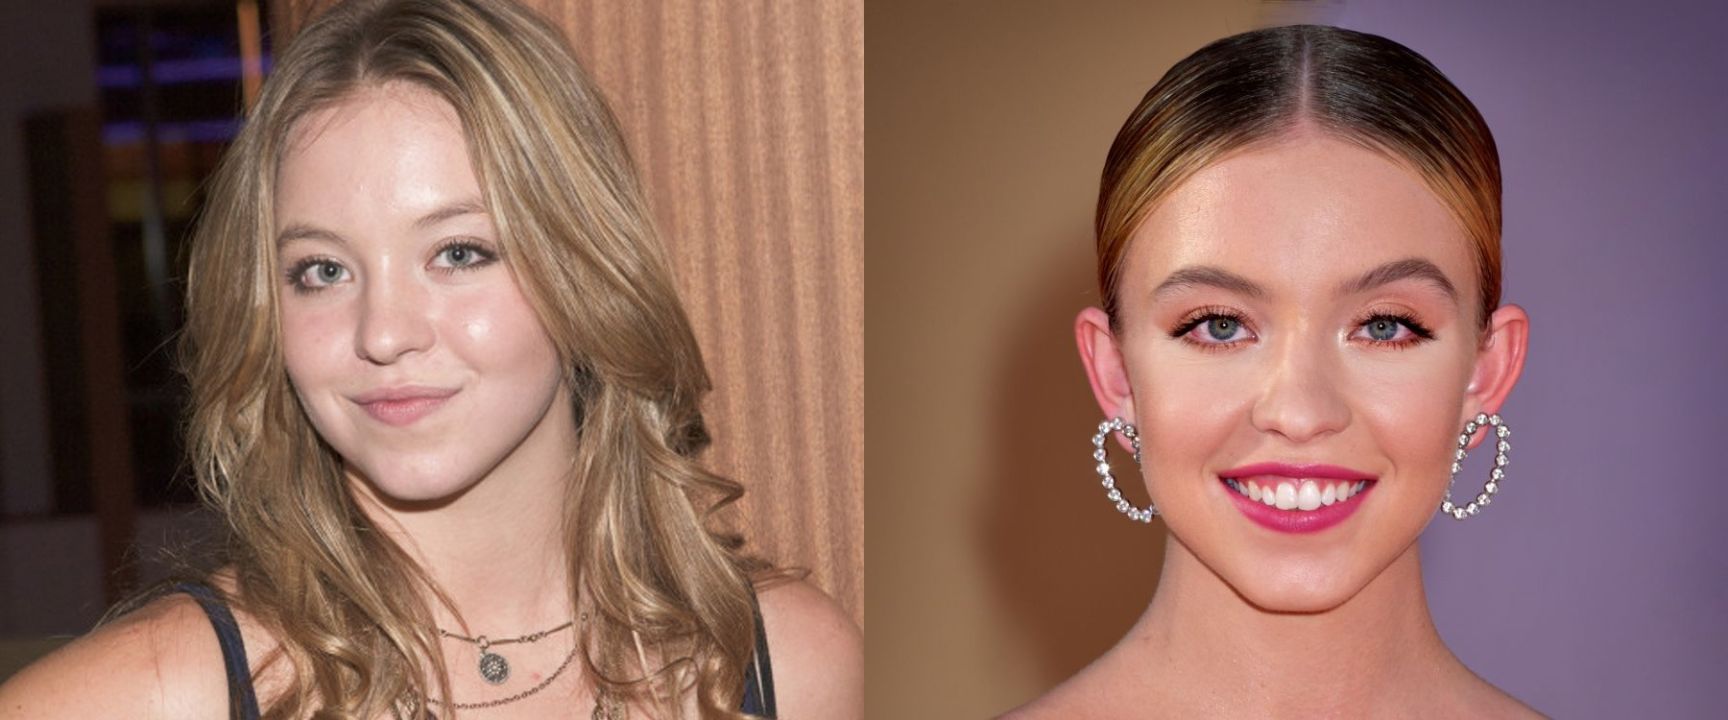 Sydney Sweeney before and after alleged plastic surgery.